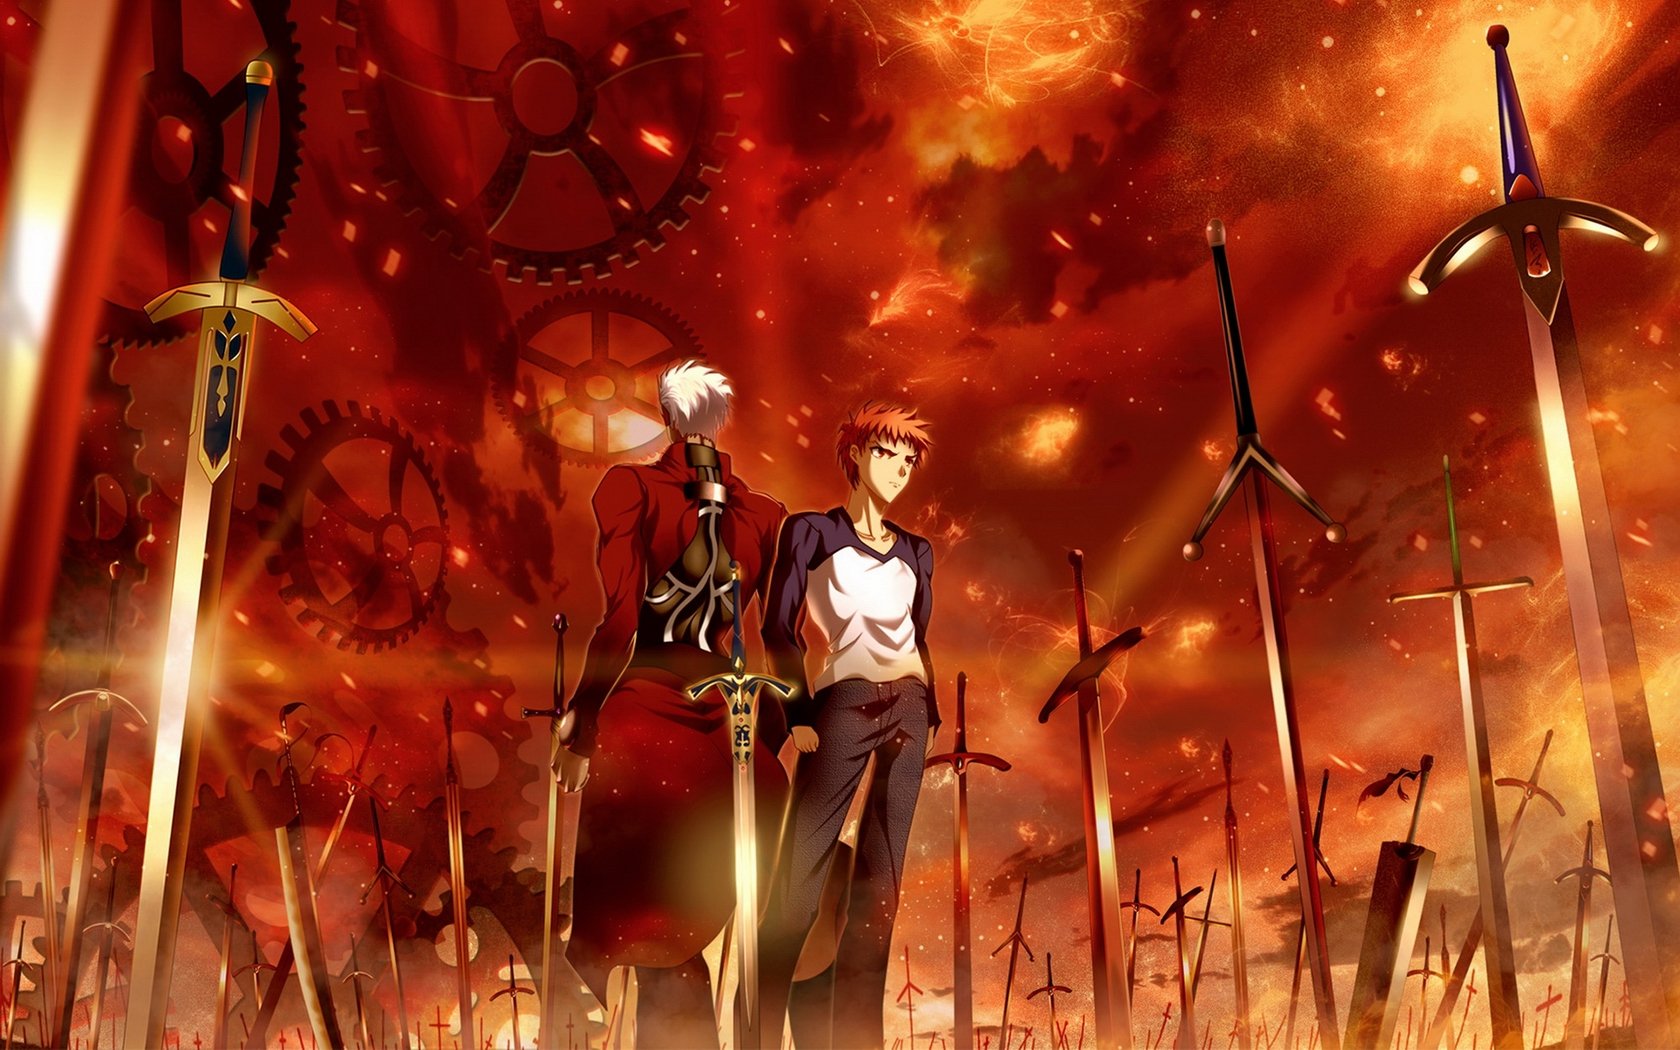 FateStay Night Unlimited Blade Works Wallpaper and